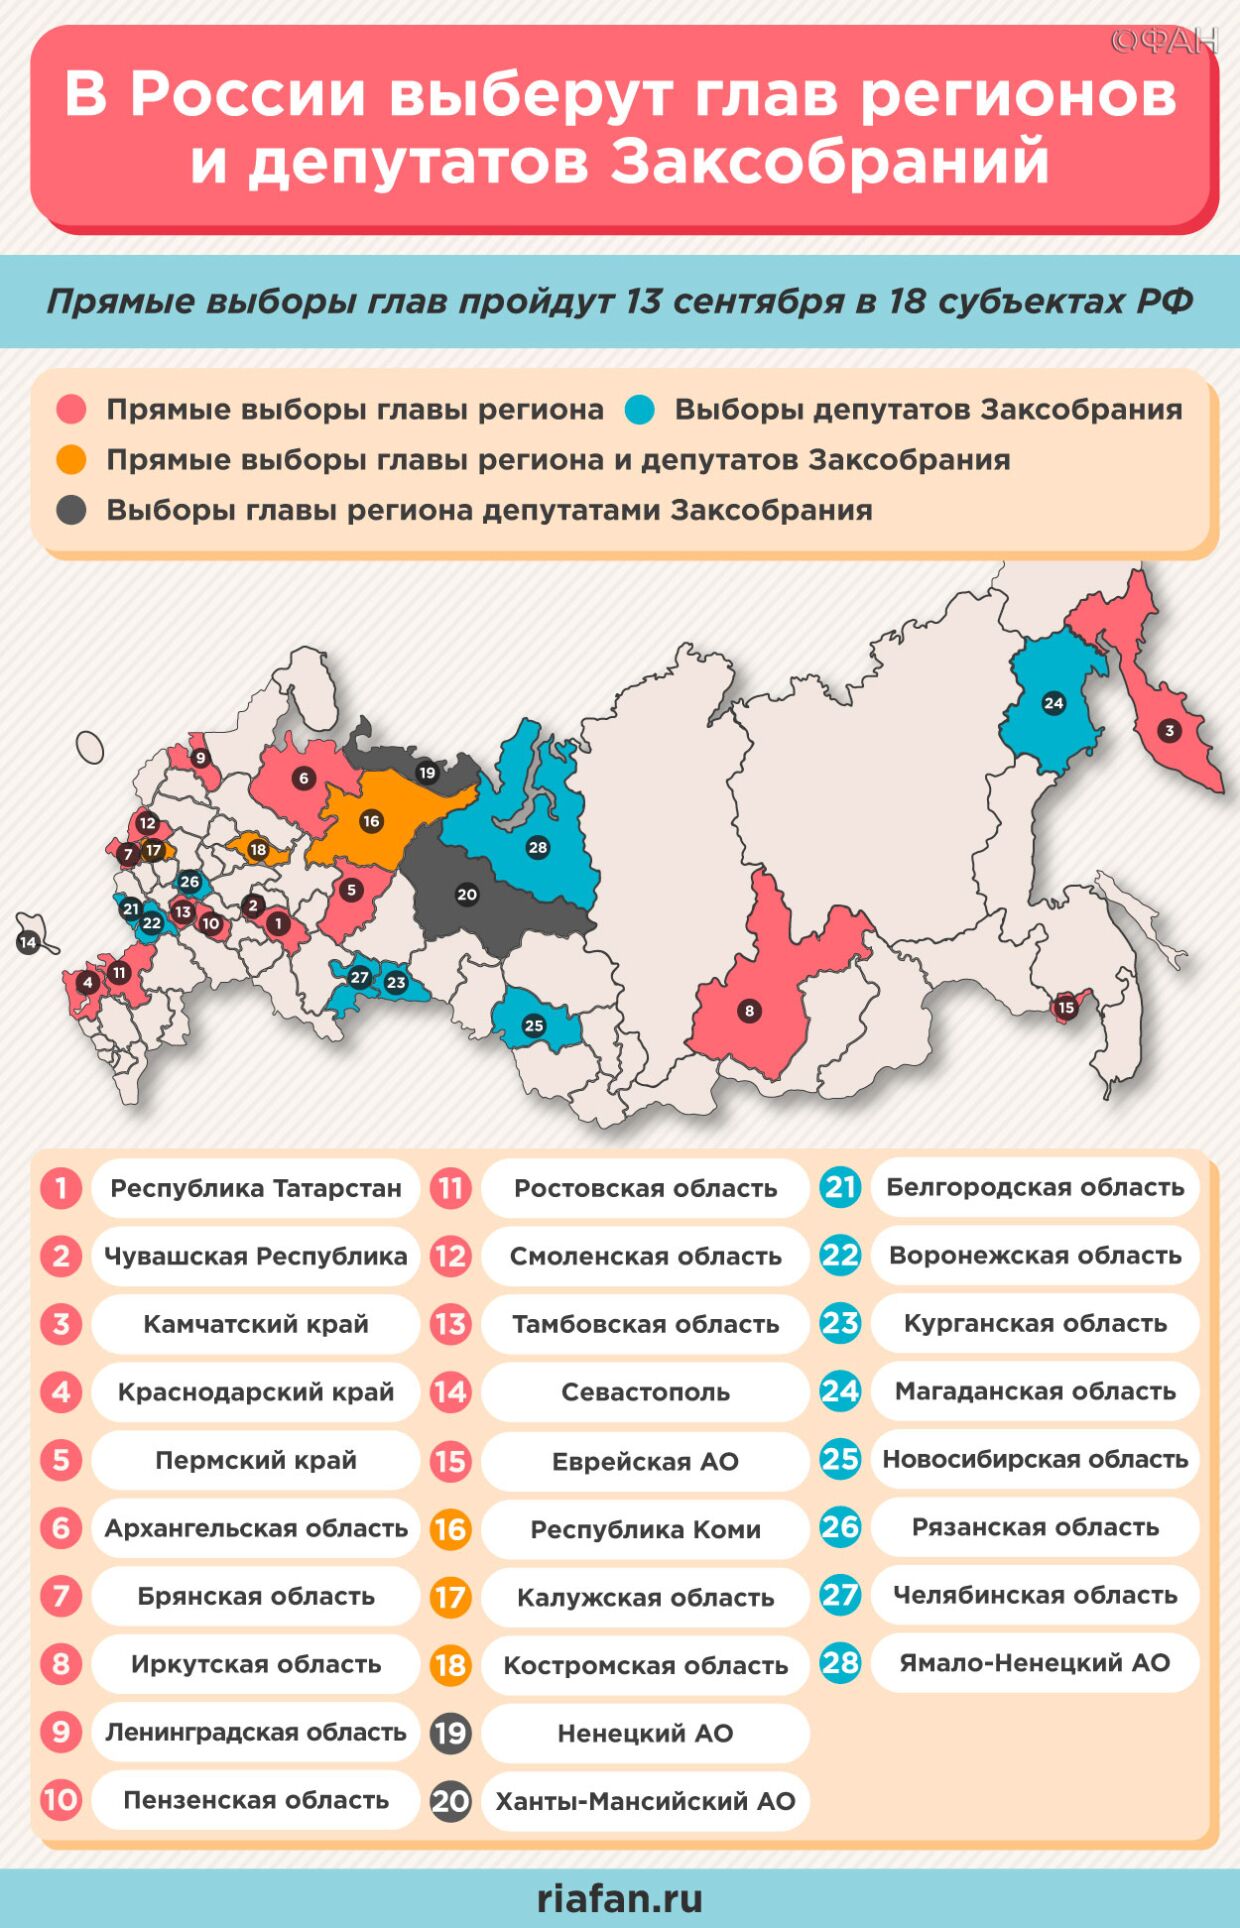 The RF OP announced a trend for provocations on the Single voting day